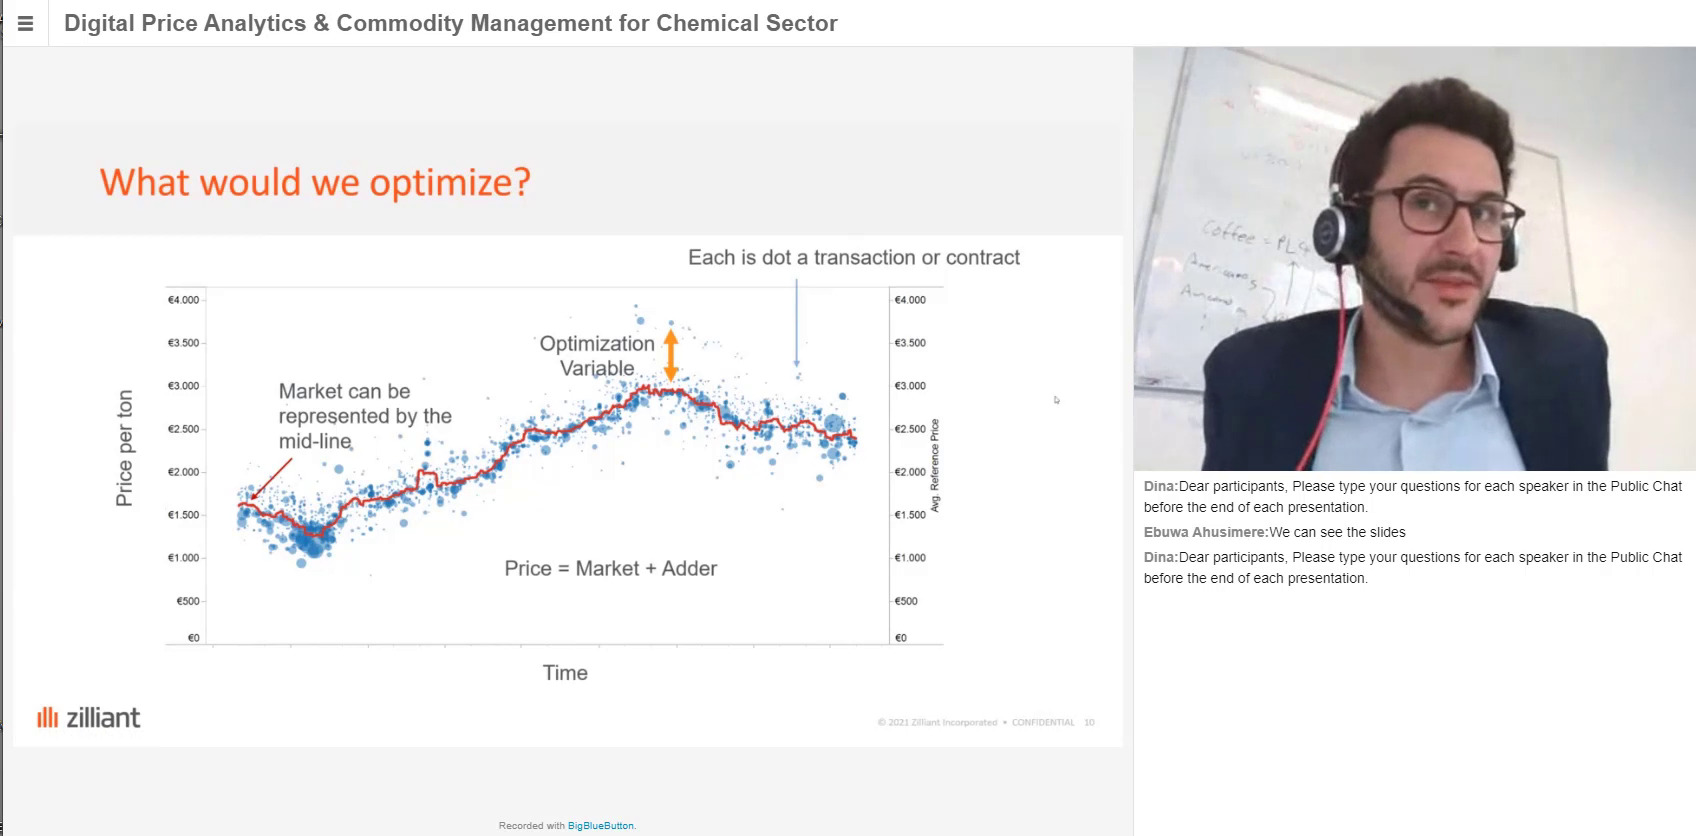 Applying Price Optimization in the Commodity-Driven Chemicals Industry